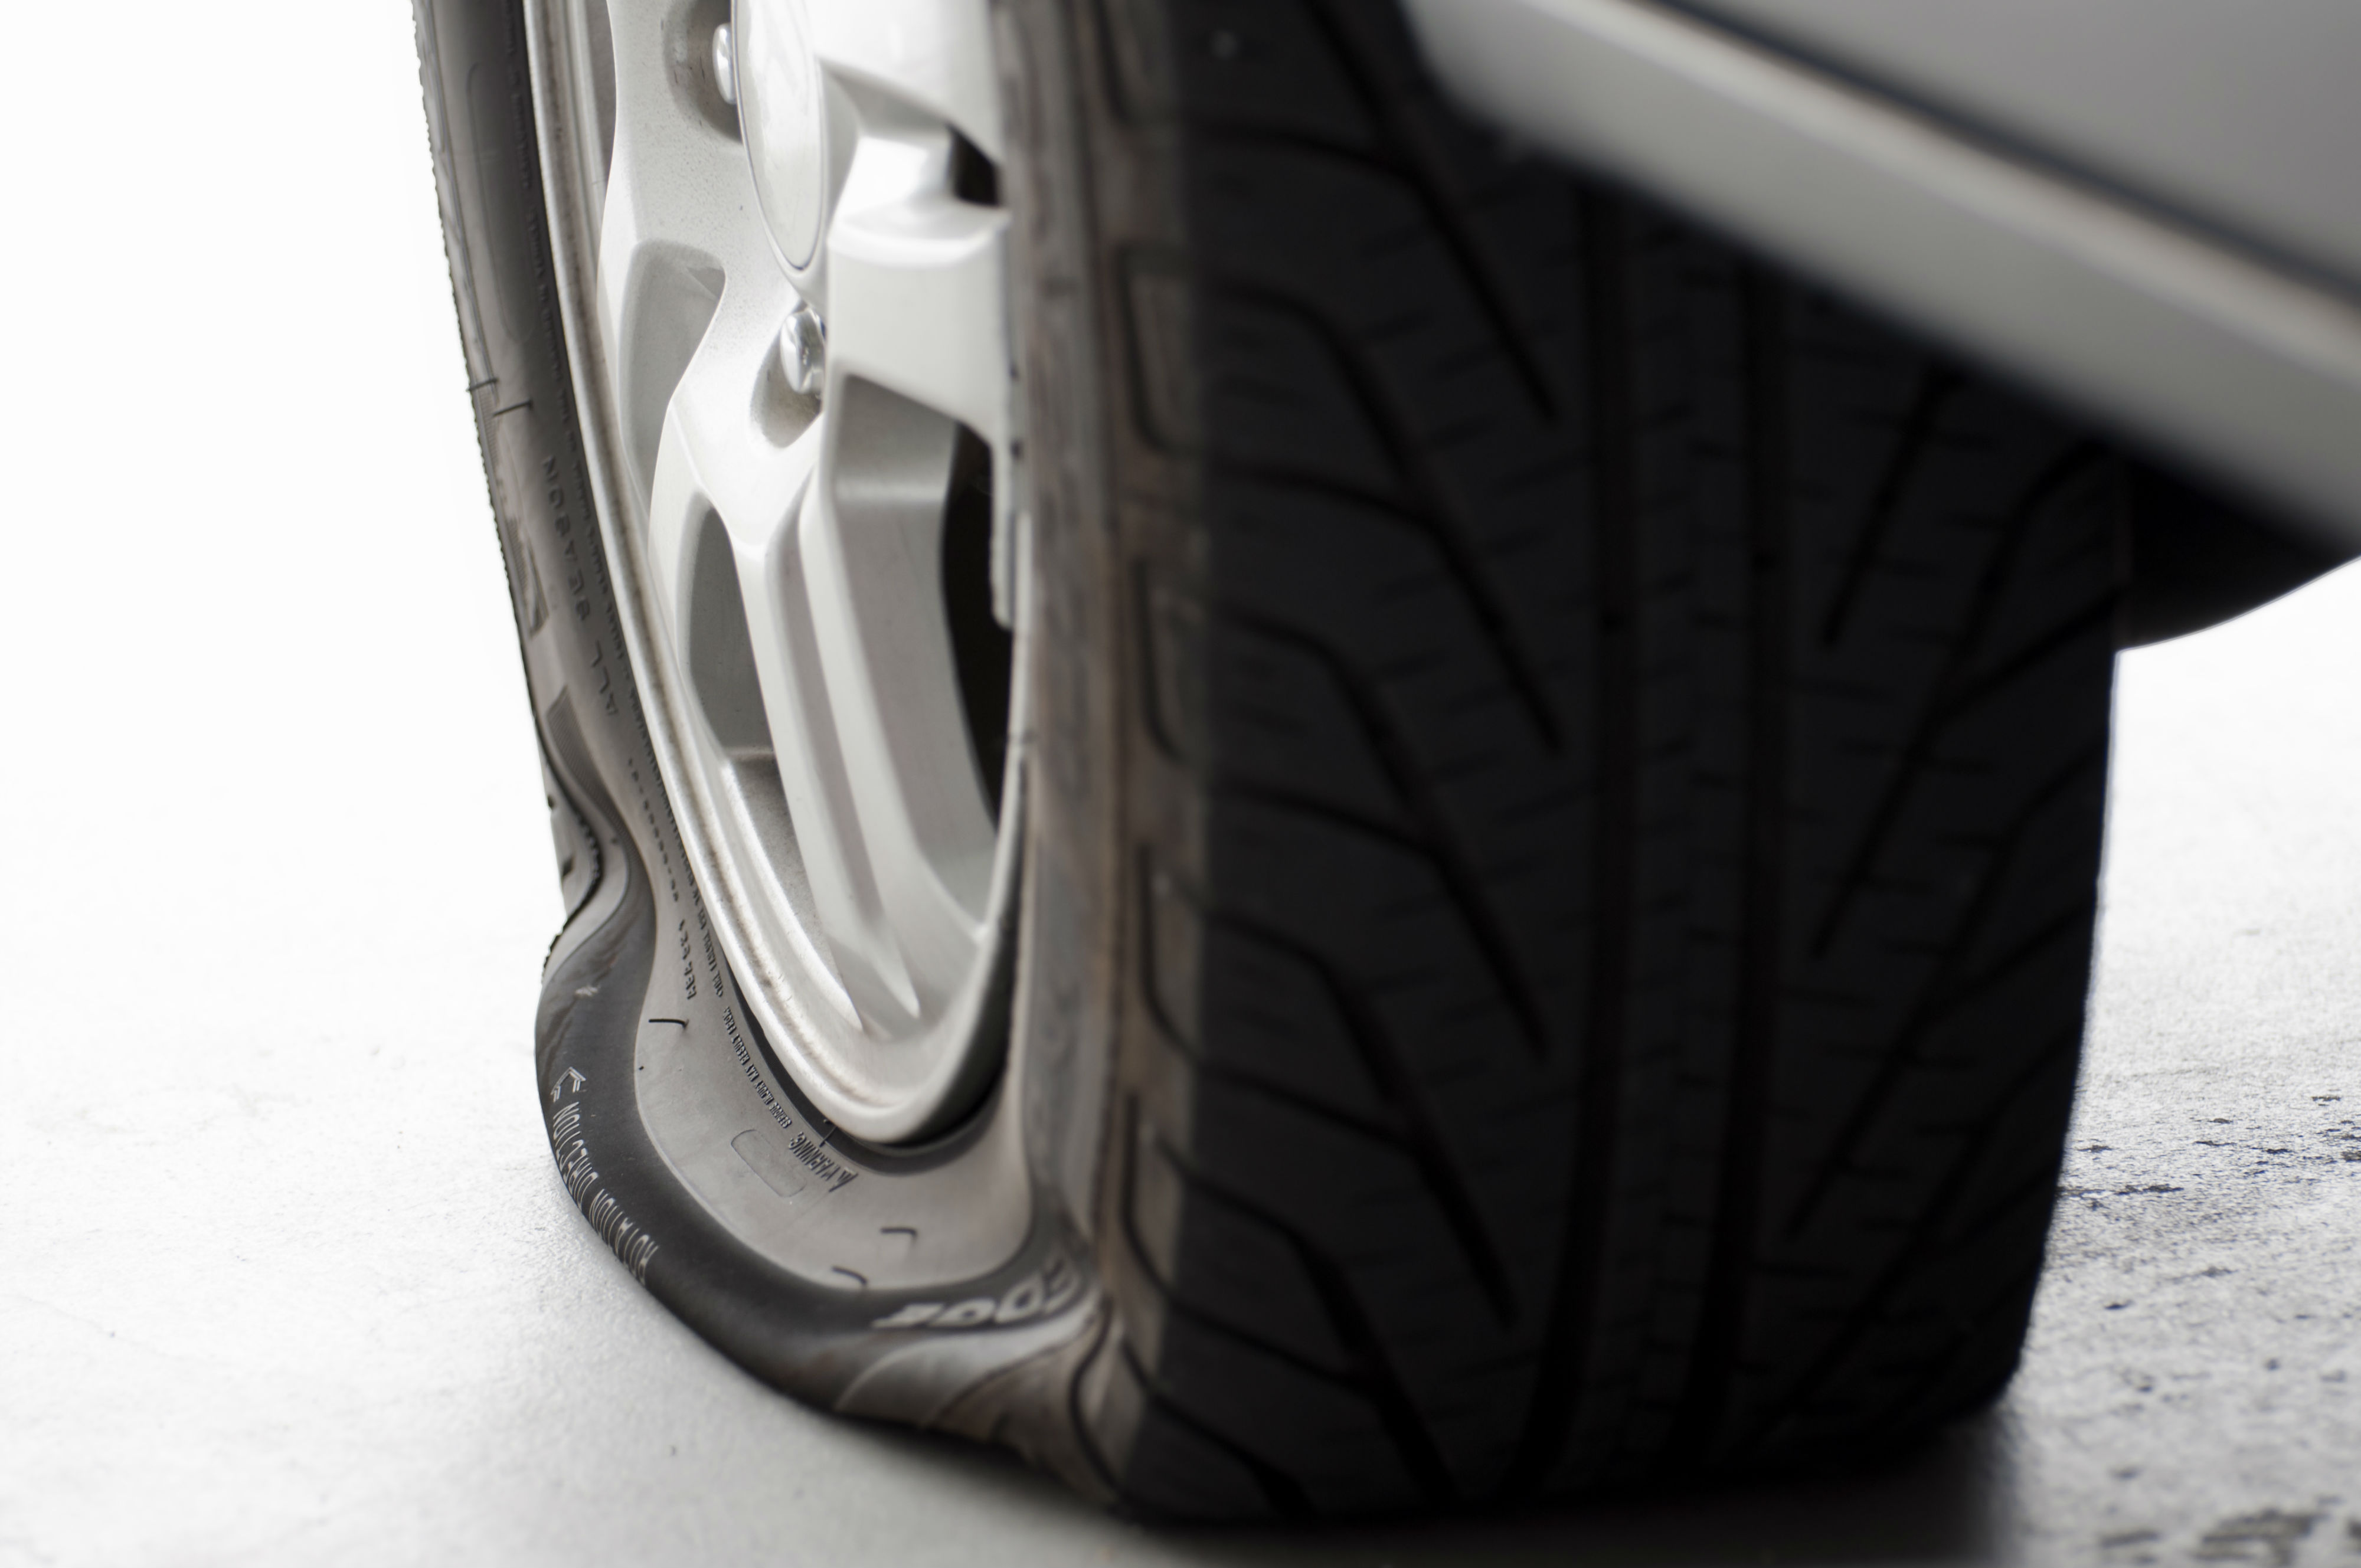 Tyre pressure warning systems fails to warn of flat tyres